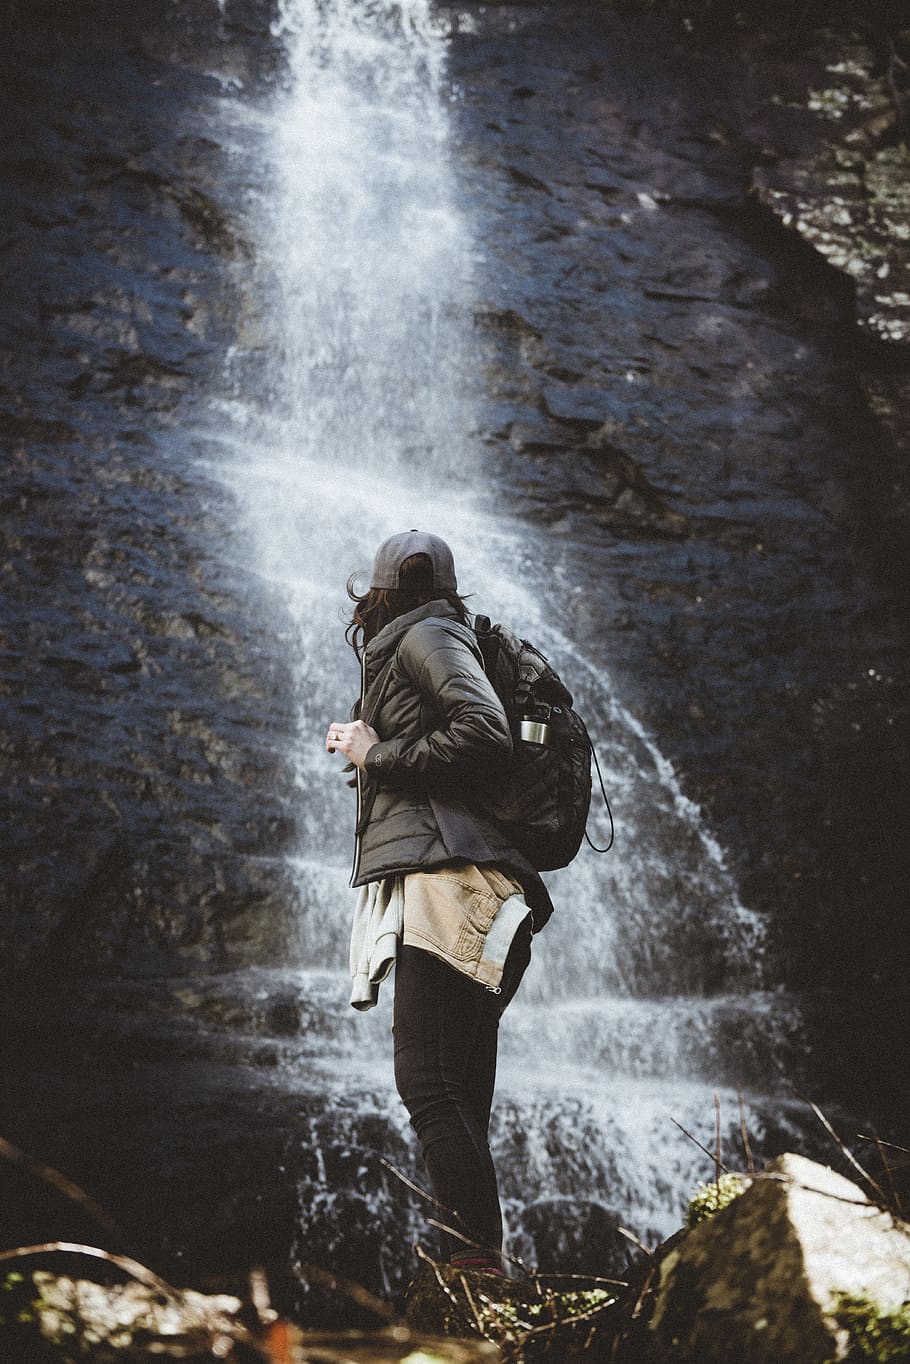 nature, people, woman, back pack, travel, adventure, water, one person, waterfall, motion